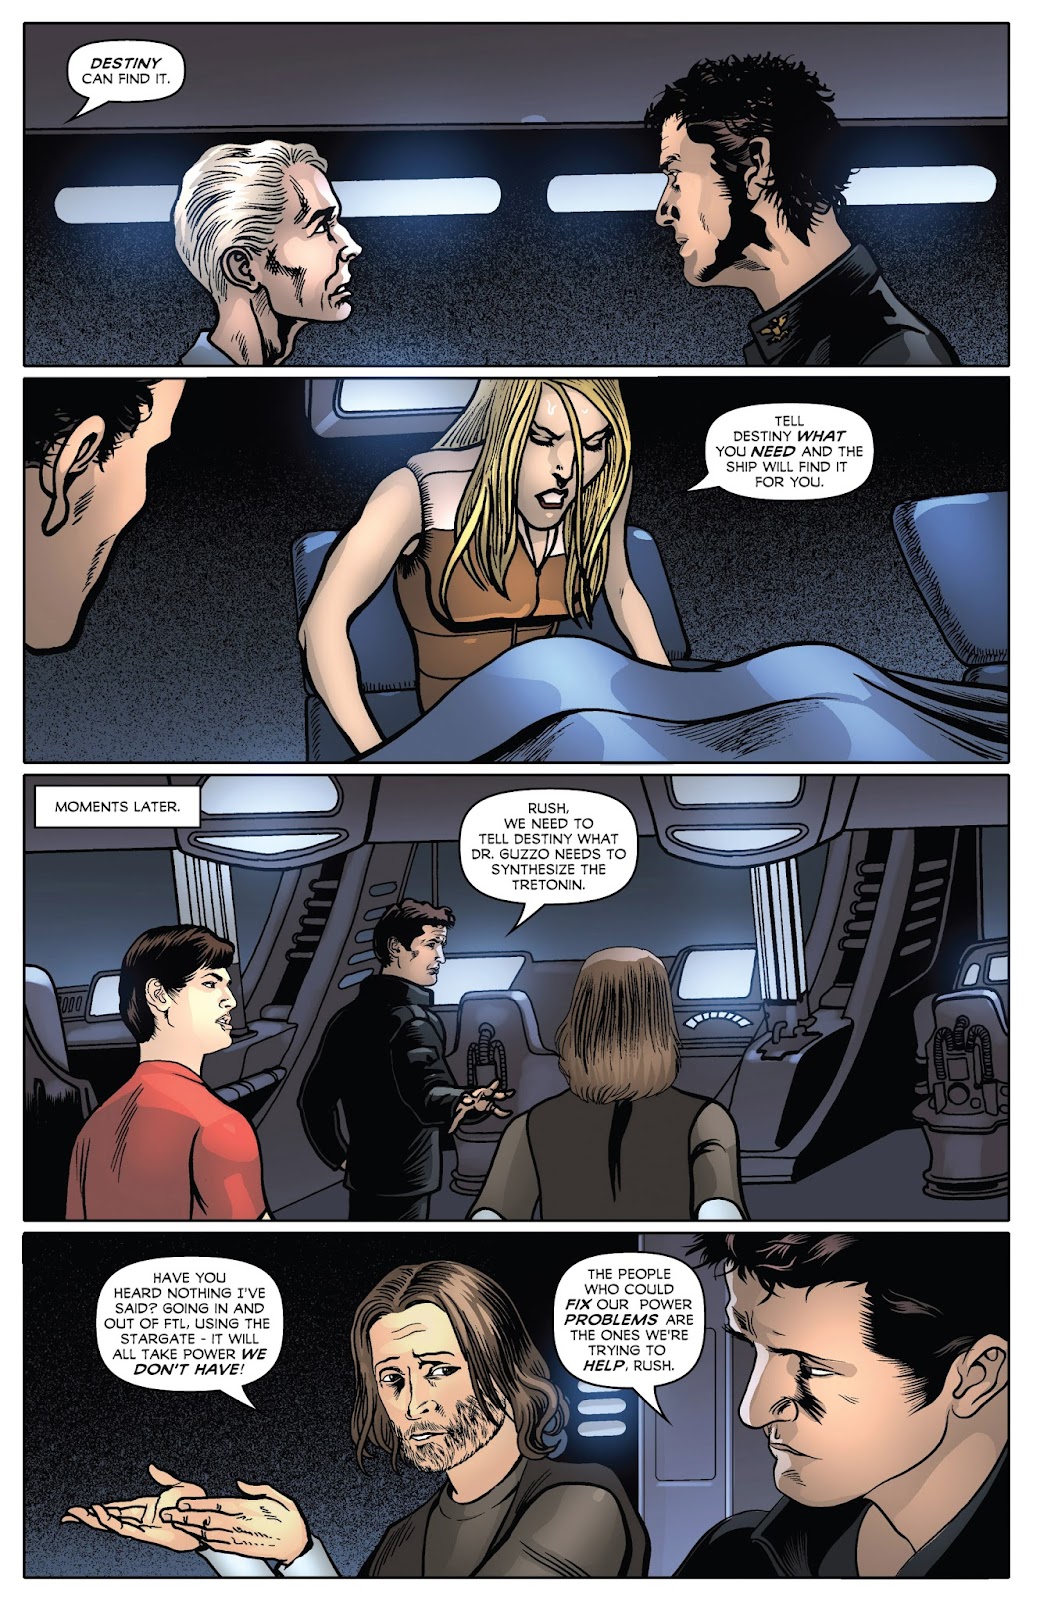 Stargate Universe: Back To Destiny issue 3 - Page 12